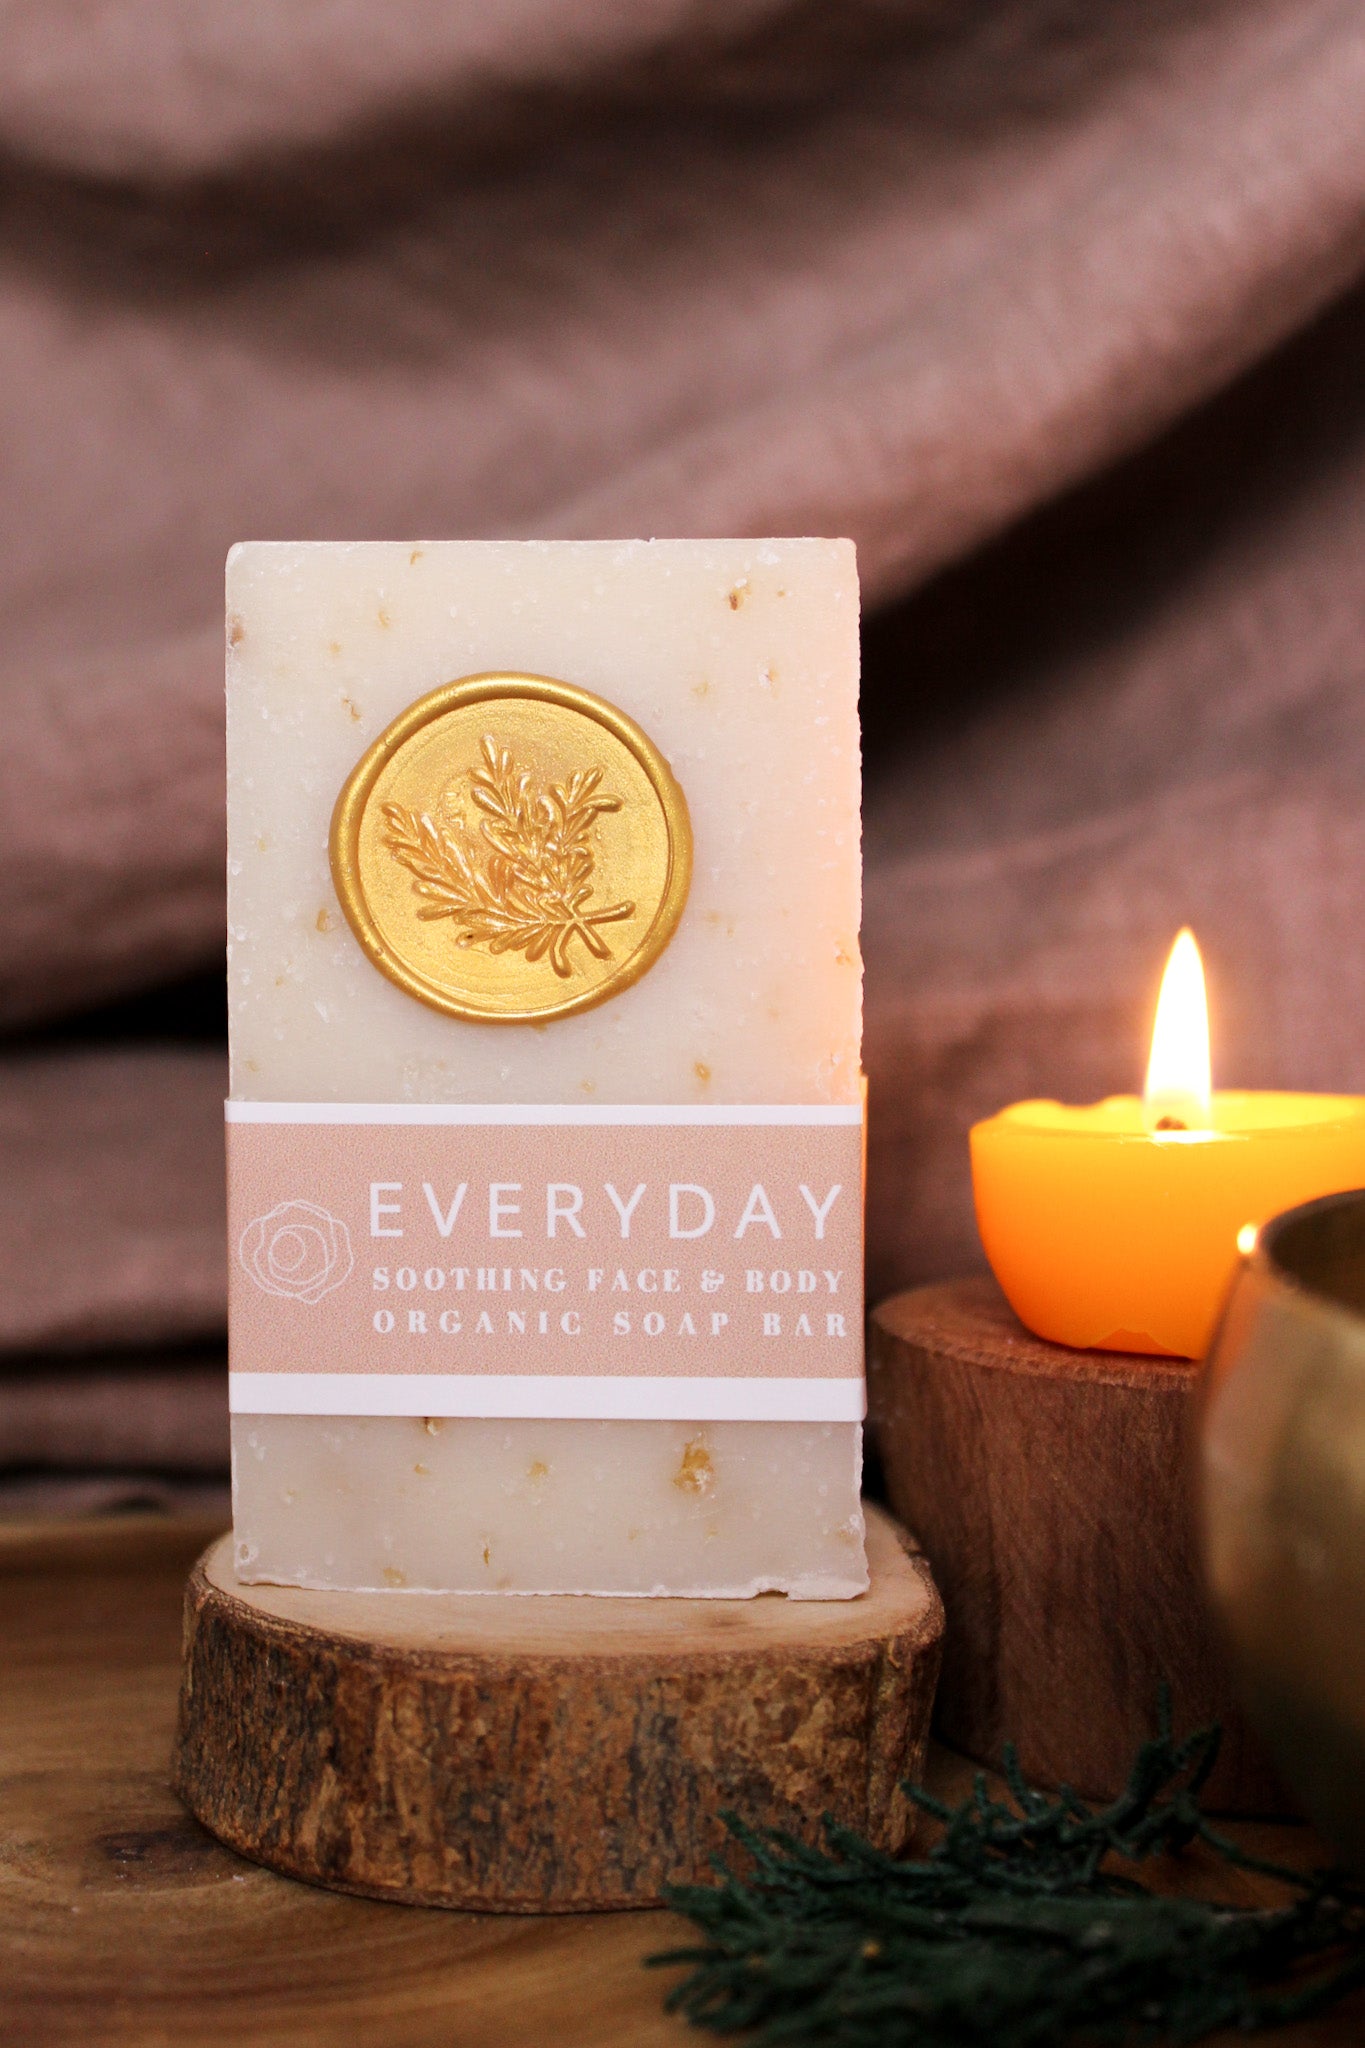 The Everyday Bar - Gentle Minimalist Multi-purpose Skin Care for Face and Body - Handmade with Natural Ingredients. Hidden Forest Naturals